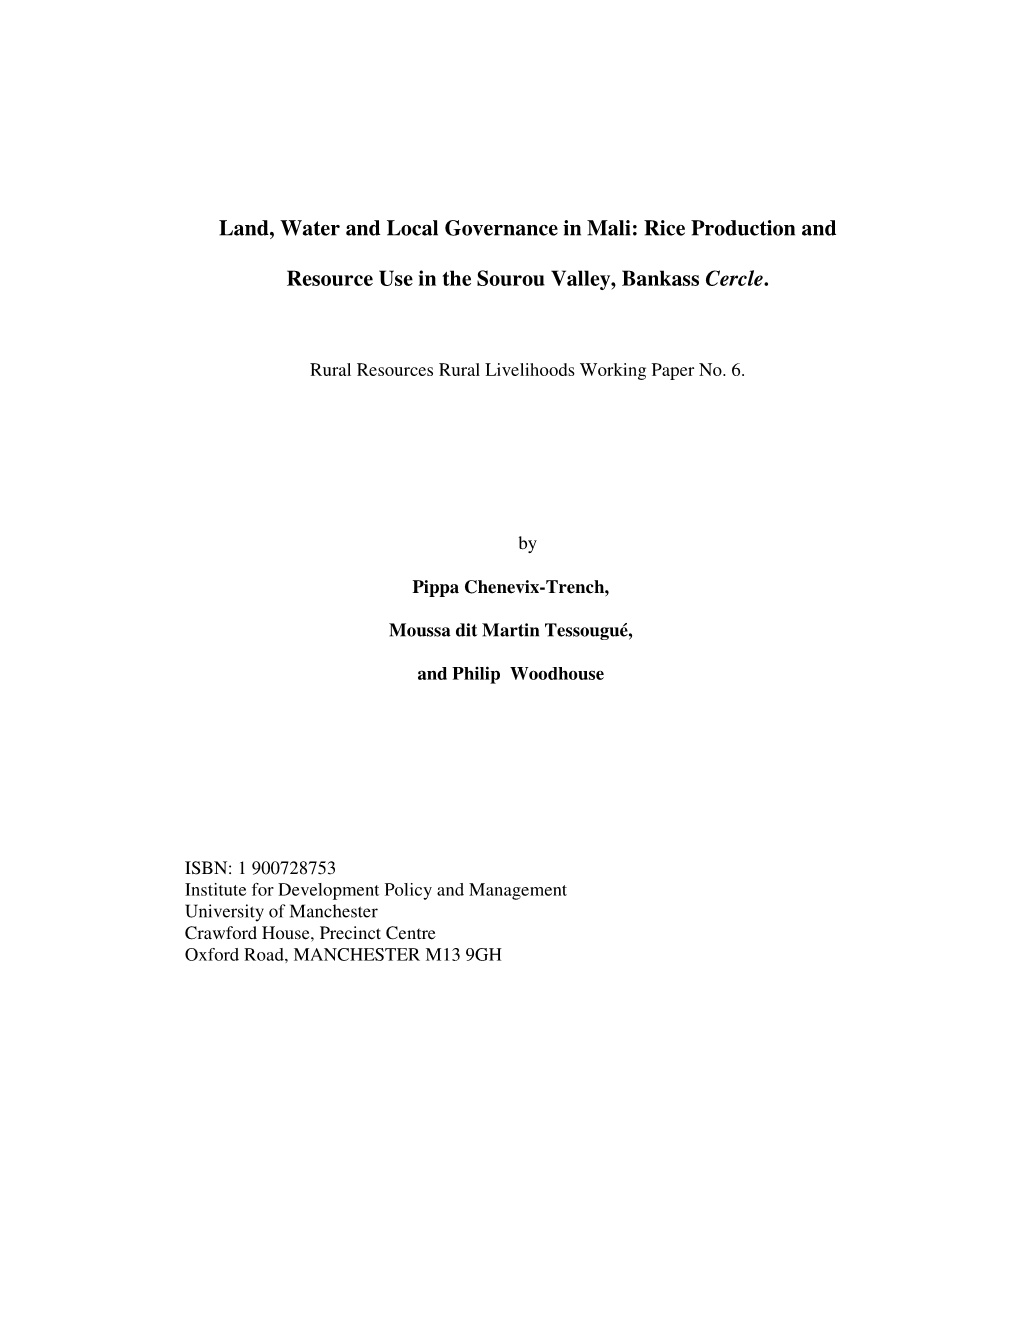 Land, Water and Local Governance in Mali: Rice Production And